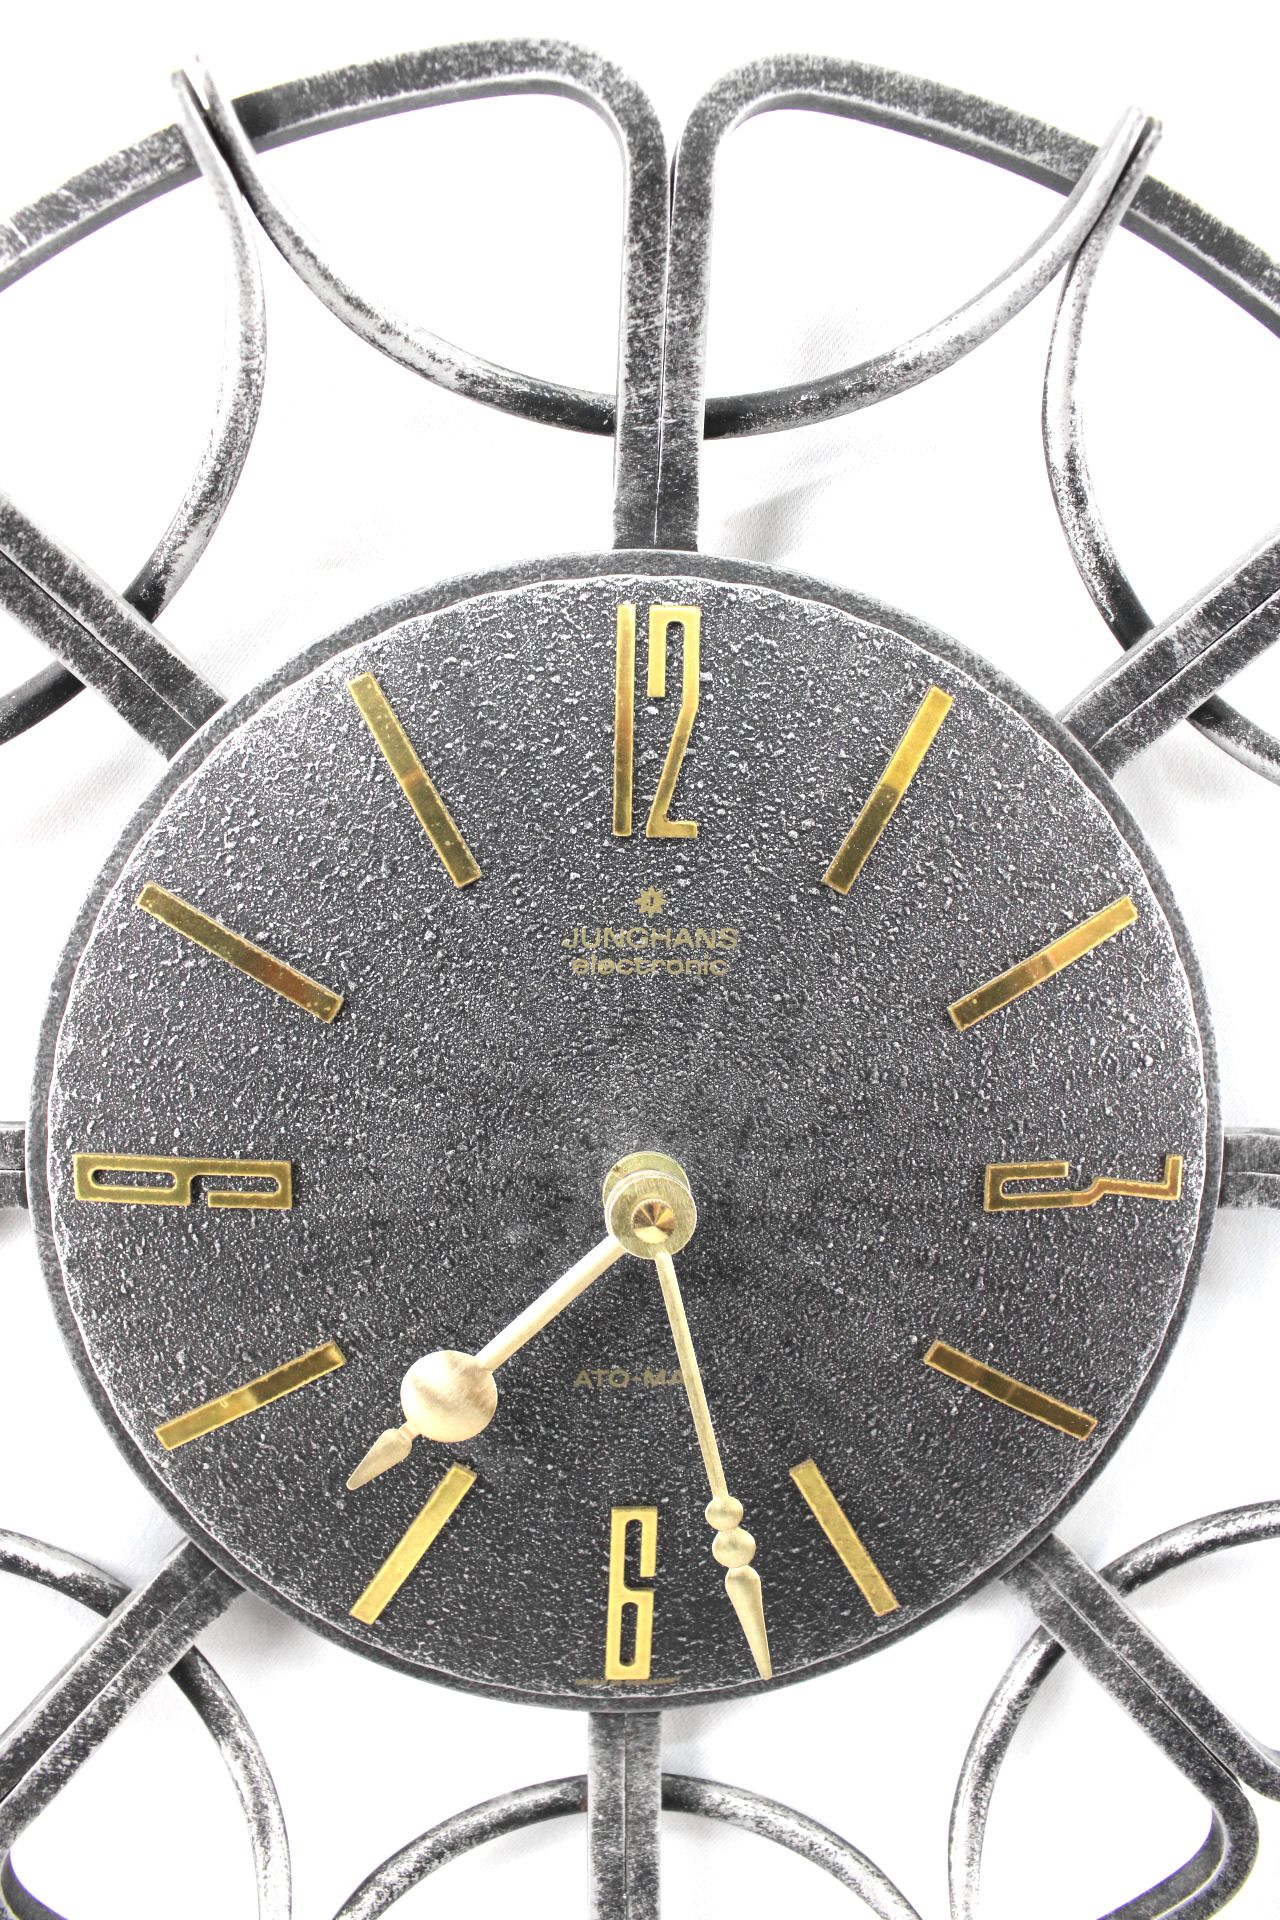 Junghans Wanduhr "electronic ATO-MAT" - Image 2 of 3